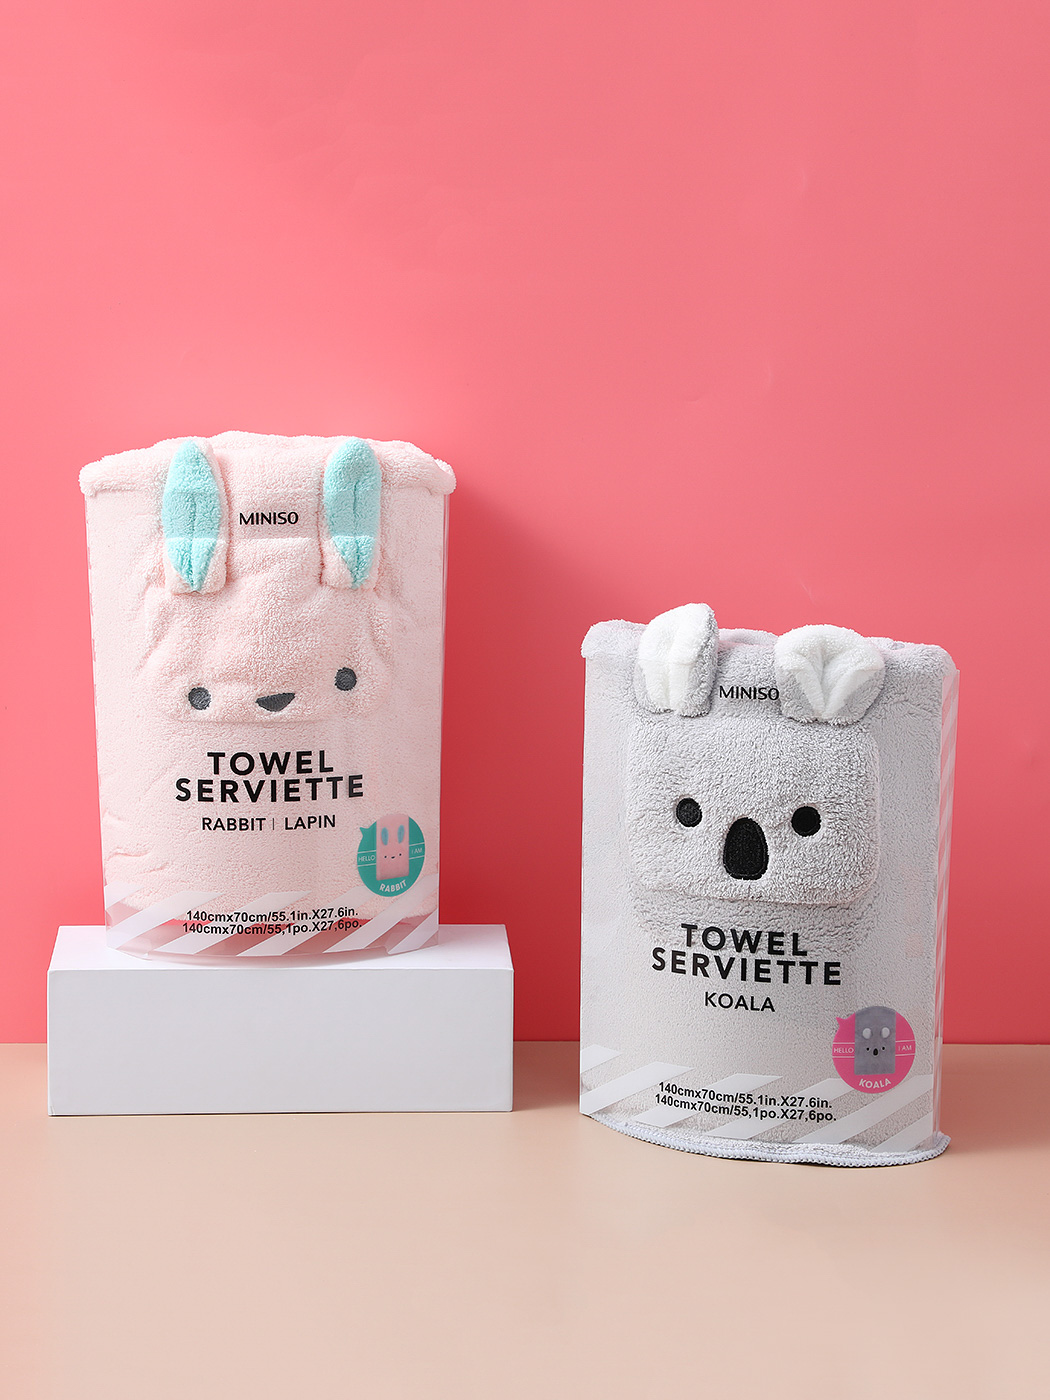 Miniso Philippines - Cute hand towels to accessorize your kitchen or  bathroom with! <3 #MinisoPh